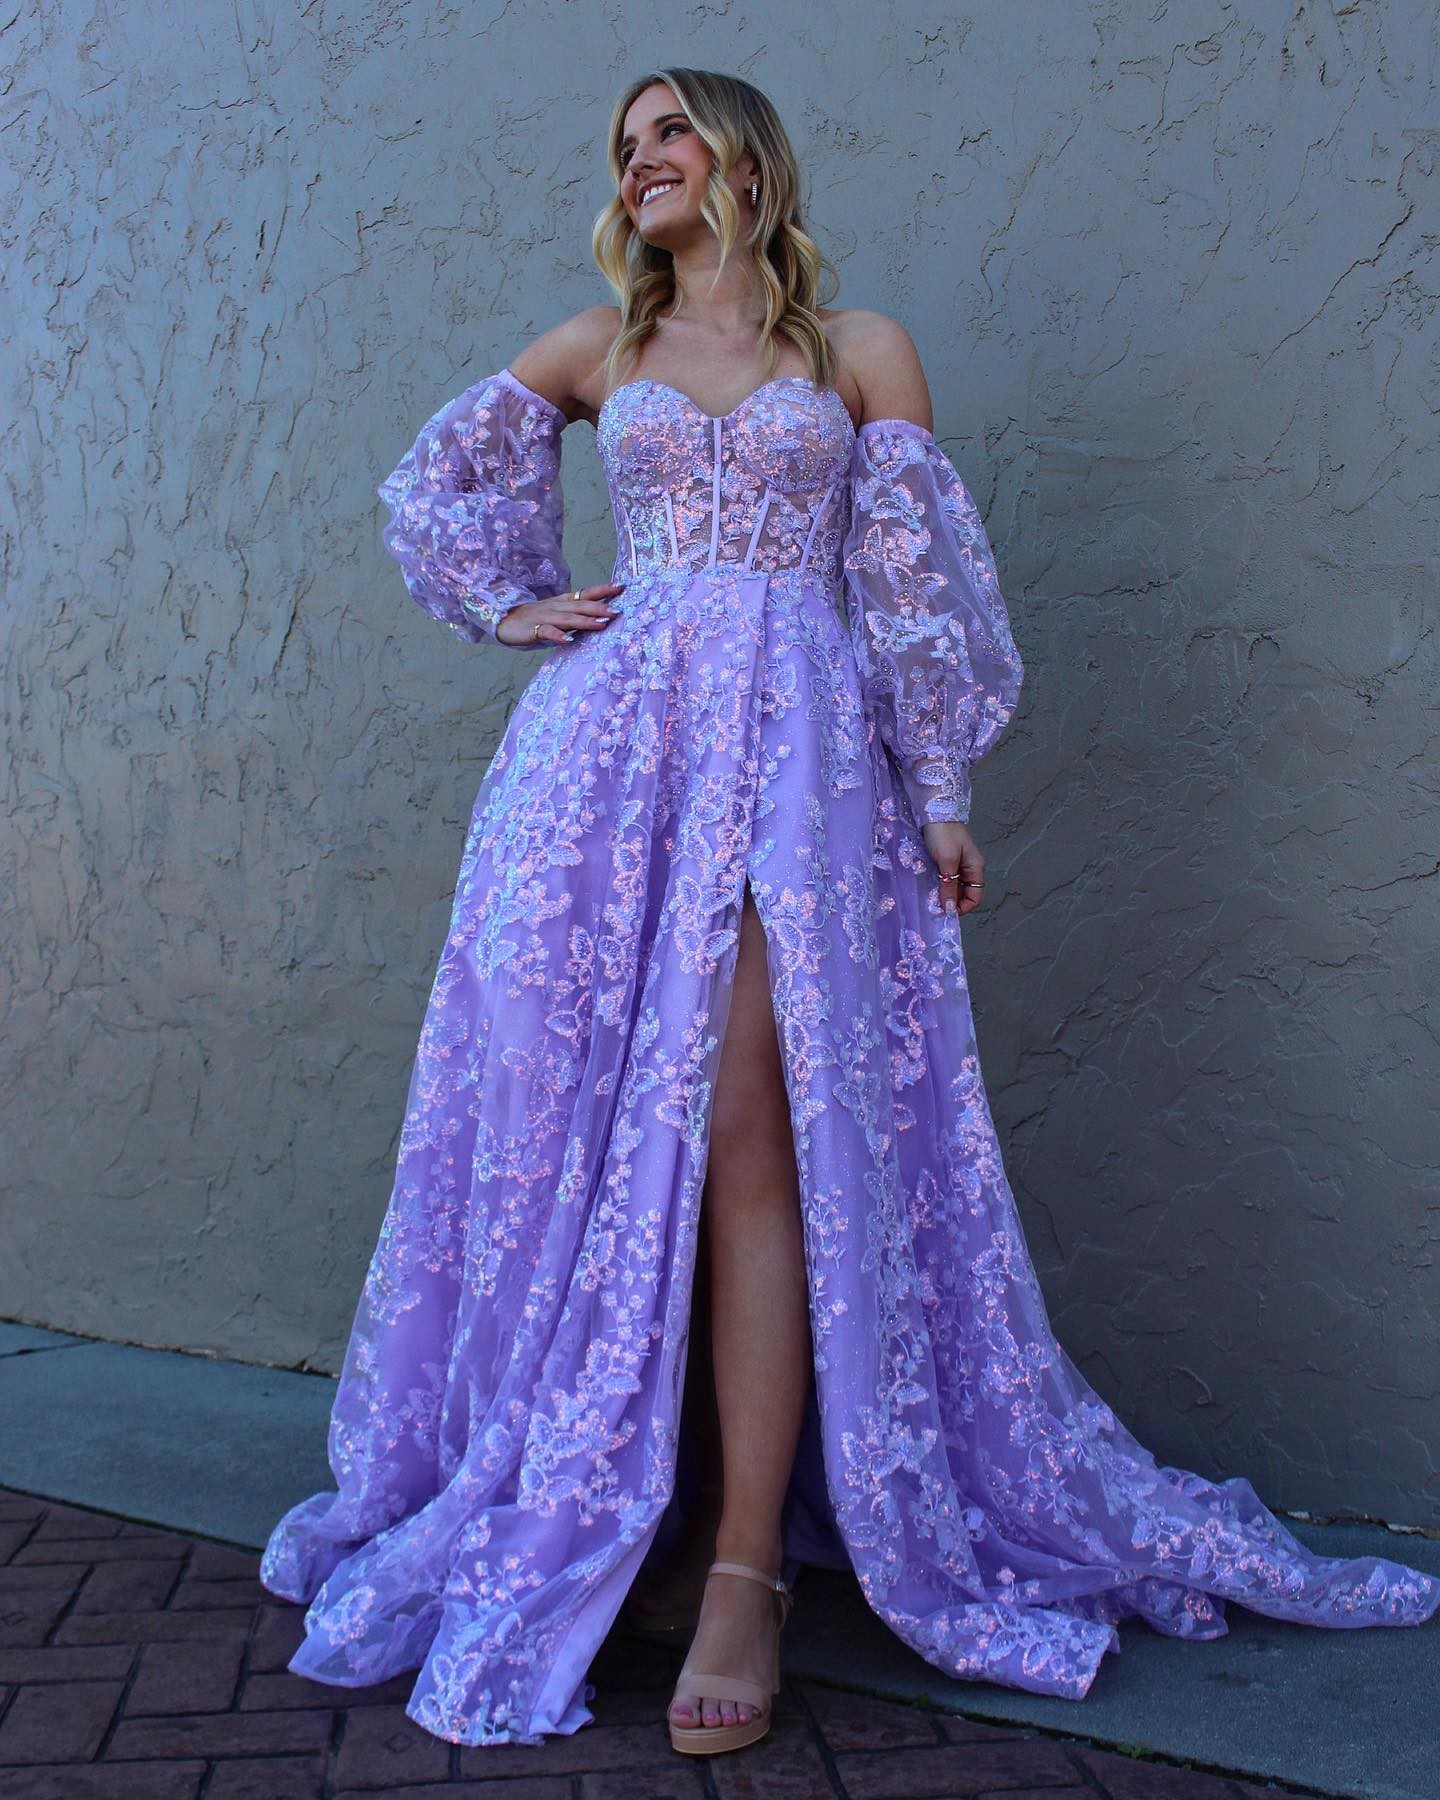 

Sweetheart Lilac Long Evening Party Dress Embroidered Butterfly 2022 Robe De Soiree Detachable Sleeves Lavender Prom Dresses Lady Met Gala Pageant Boning Slit, Ivory